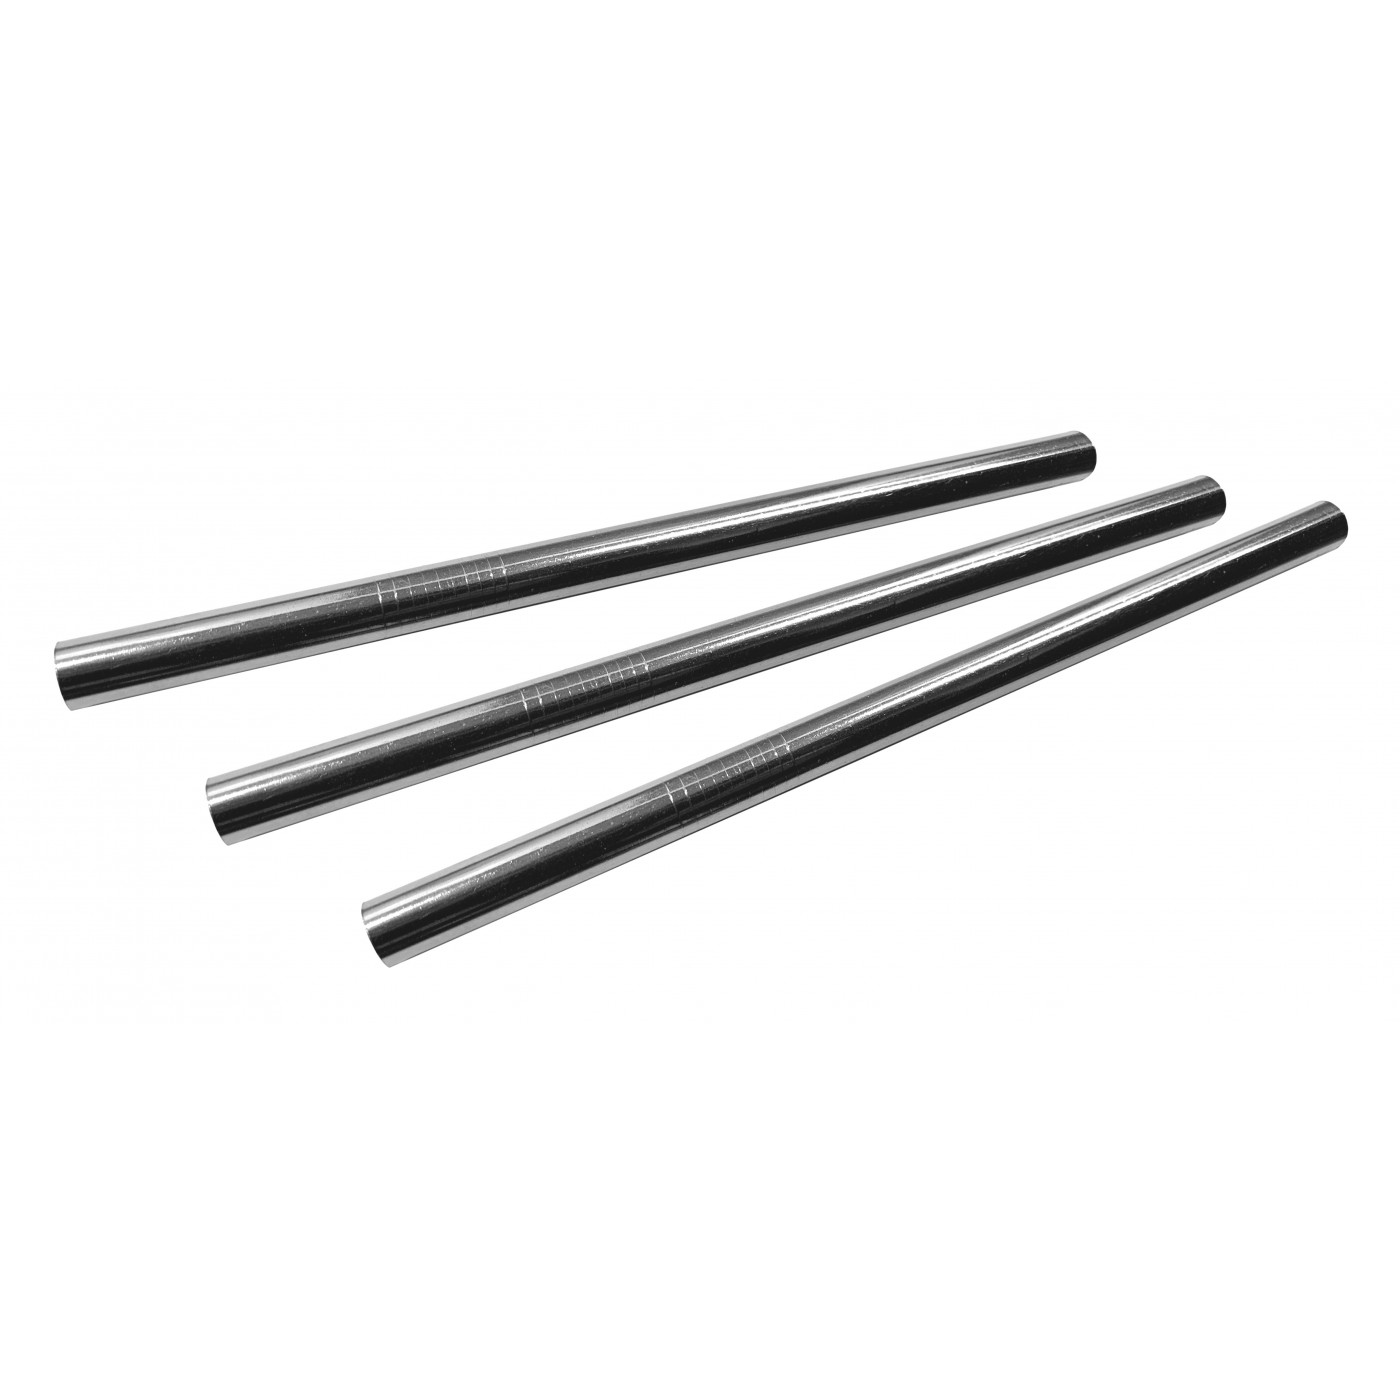 Set of 10 stainless steel pipes/straws (12 mm diameter)